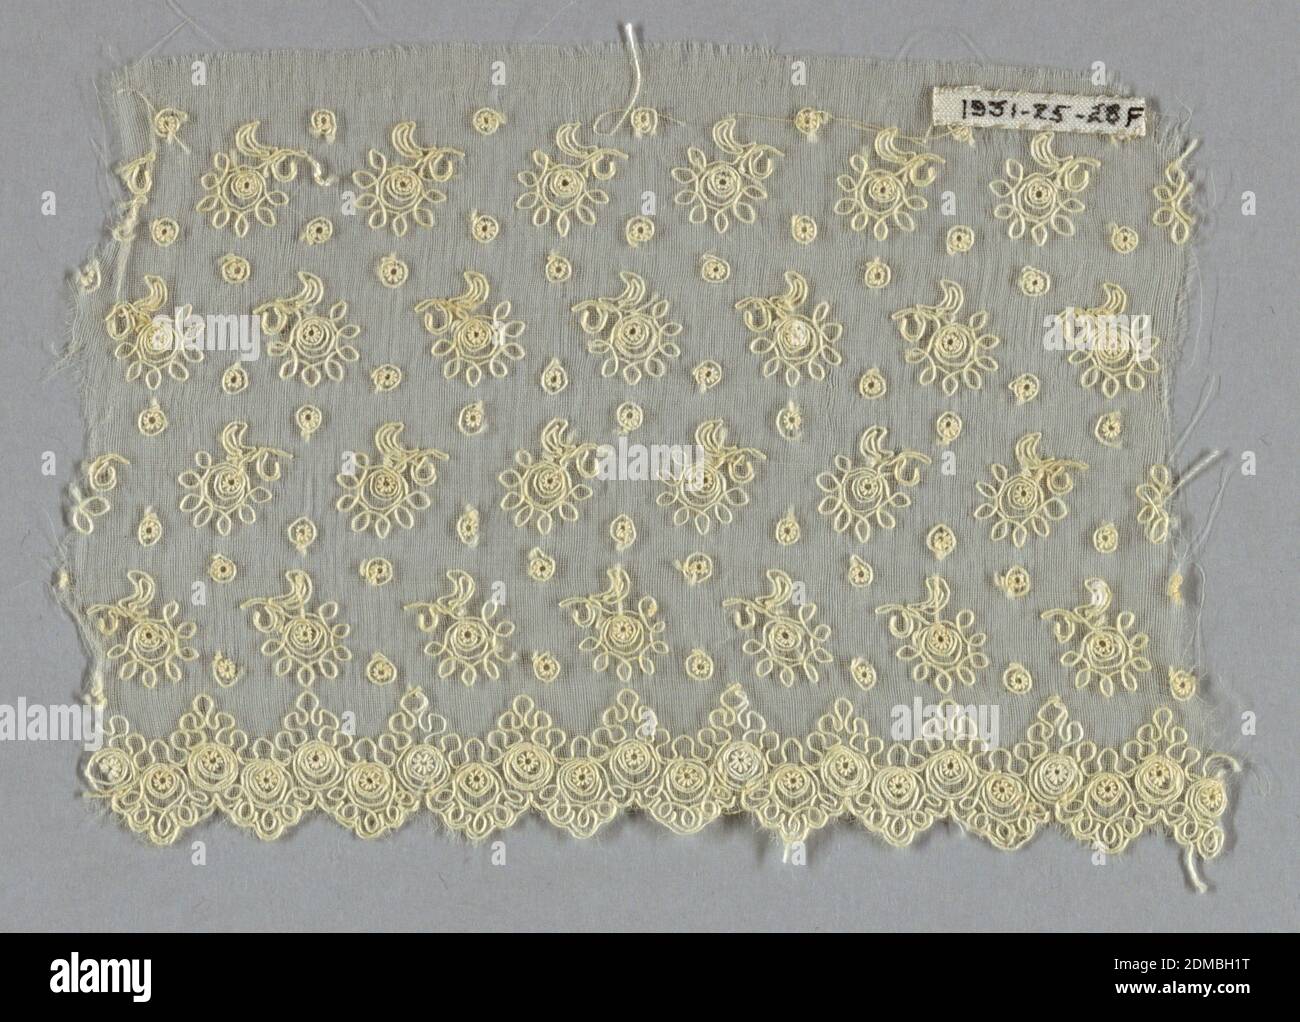 Fragments, Technique: machine embroidery, Transparent substrate embroidered with white thread with alternating rows of single flowers with stems. Scalloped border with small rosettes surrounded by curlicues., France, late 19th century, embroidery & stitching, Fragments Stock Photo